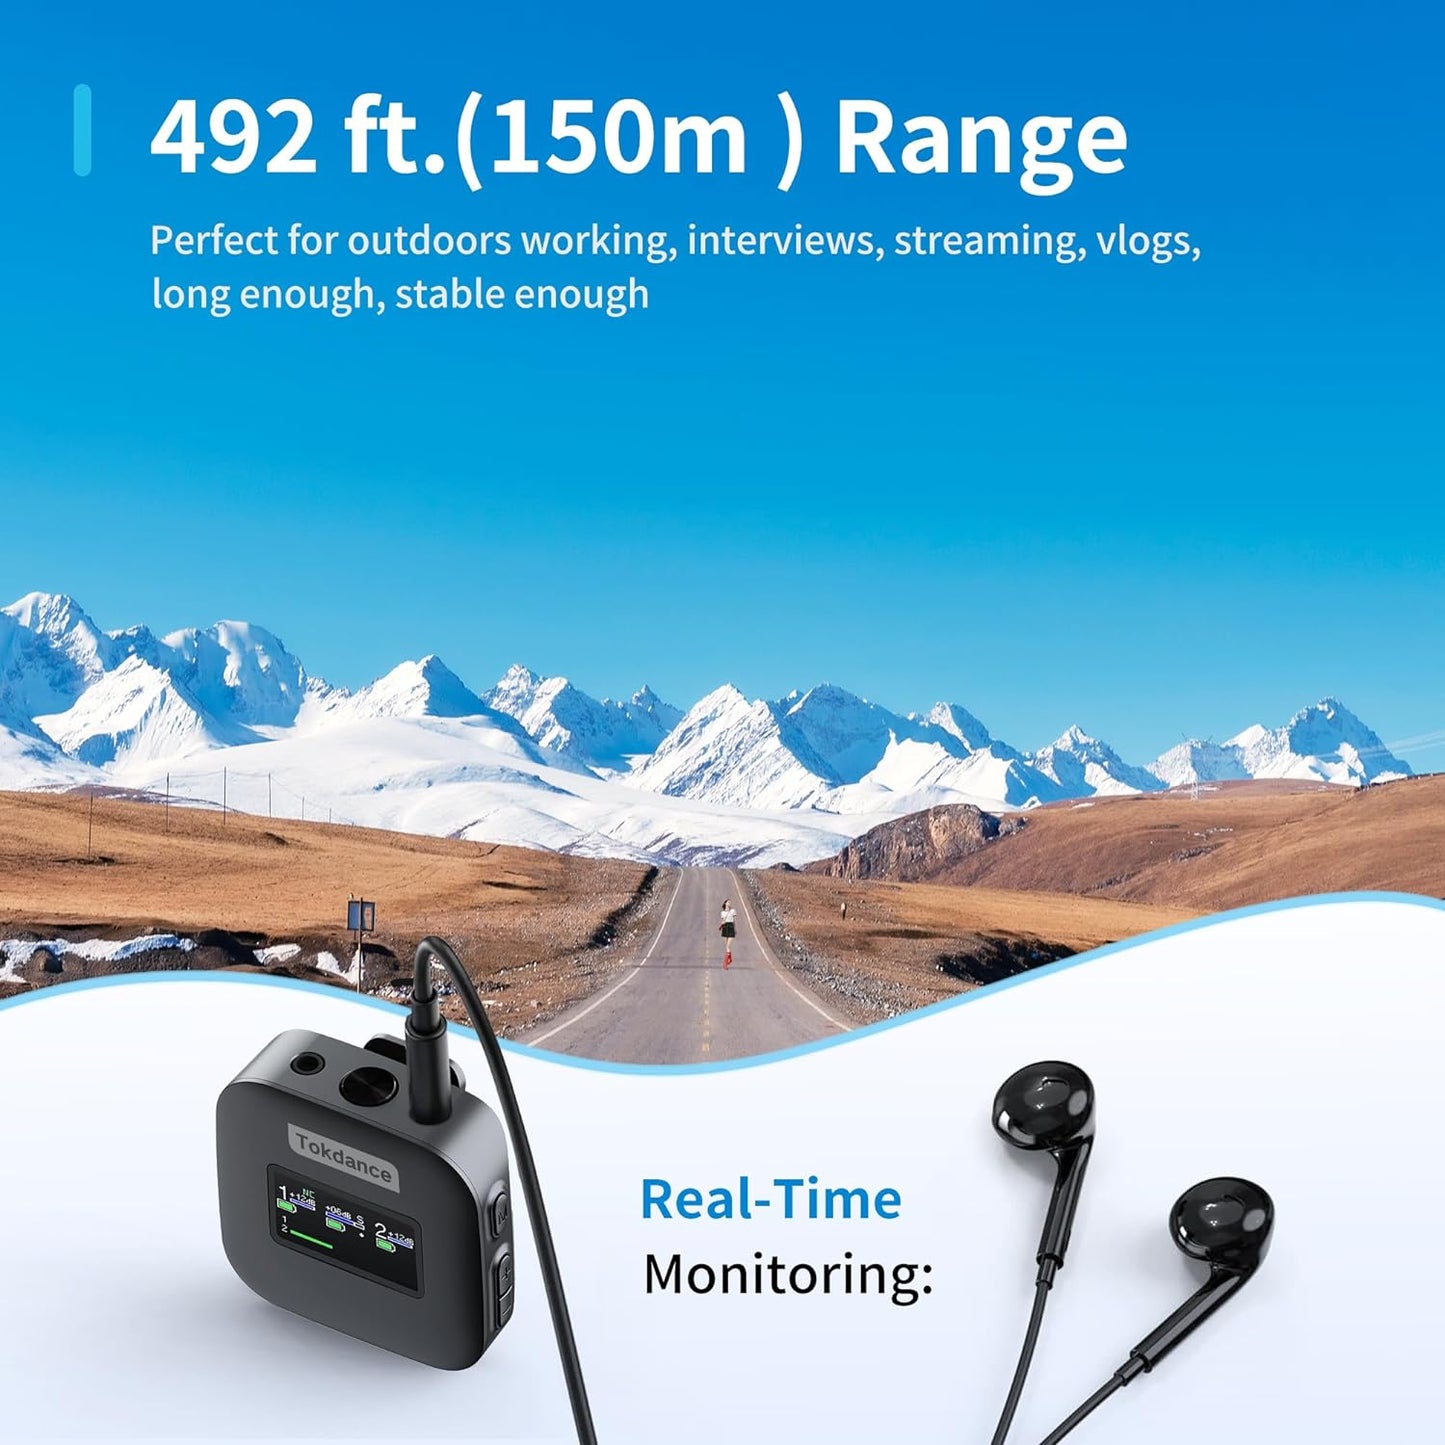 Tokdance 2 Pack Wireless Lavalier Microphone,Lossless Sound,Noise Cancellation,492 ft.(150m) Range,30H Battery,Lapel Mics for YouTube/Tiktok/Live Streaming/Vlog/iPhone/Camera/Android